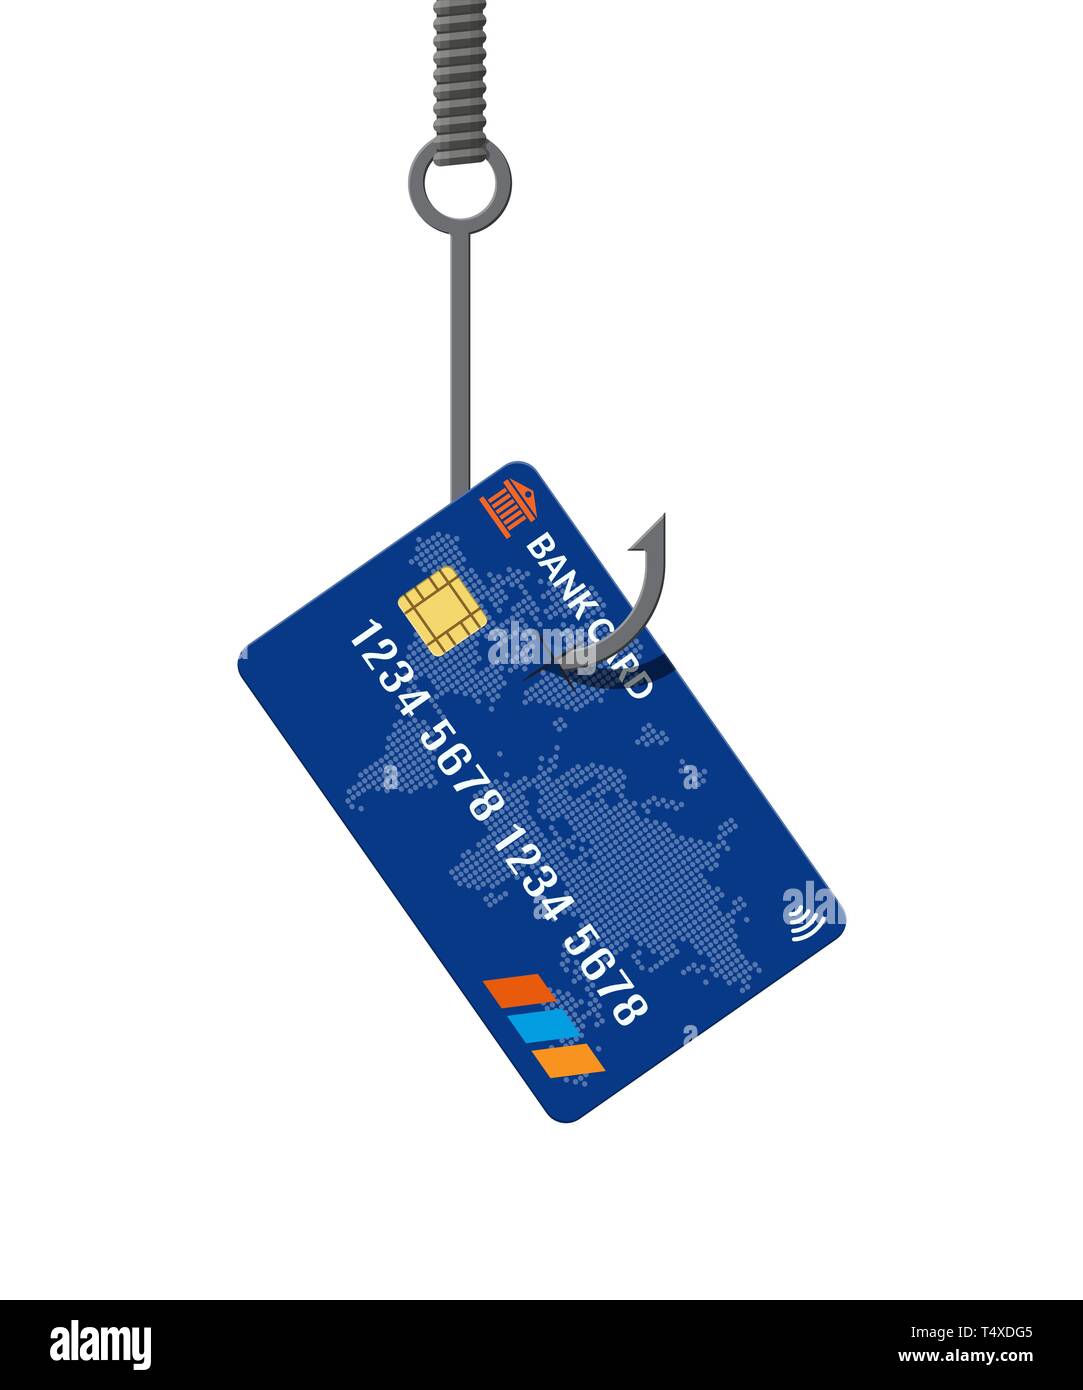 Plastic bank card on fishing hook. Money trap concept. Hidden wages, salaries black payments, tax evasion, bribe. Anti corruption. Vector illustration Stock Vector